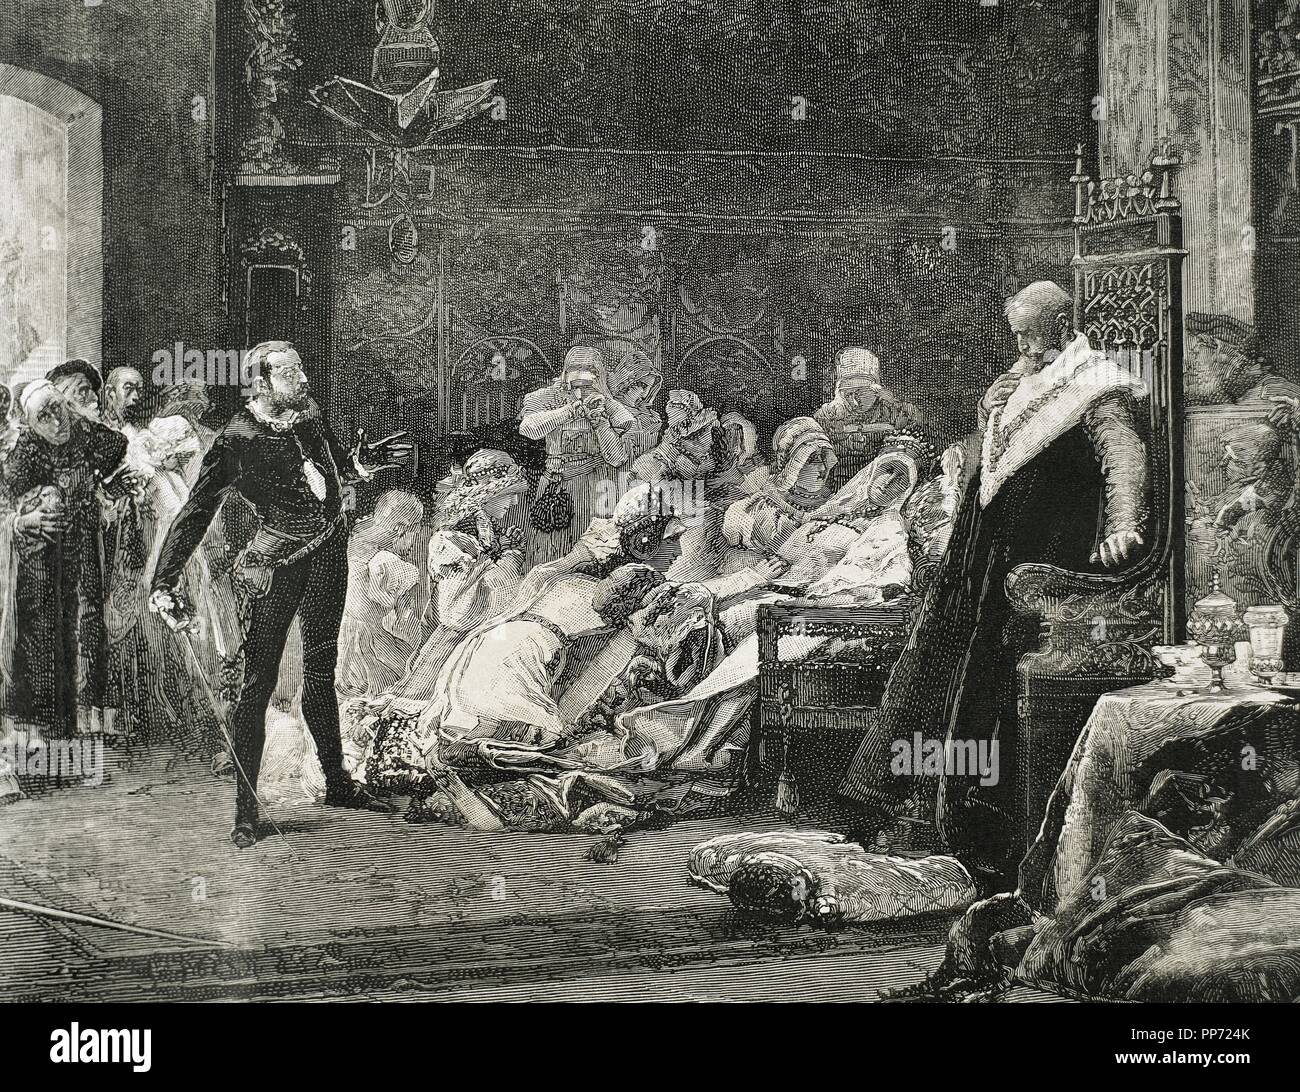 William Shakespeare (1564-1616). English writer. Hamlet. Queen Gertrude dies poisoned after drinking to the health of Hamlet for his victory in the duel with Laertes. Engraving after painting by Salvador Sanchez Barbudo 'The last scene of Hamlet,' 1884. Engraving, 19th century. Stock Photo